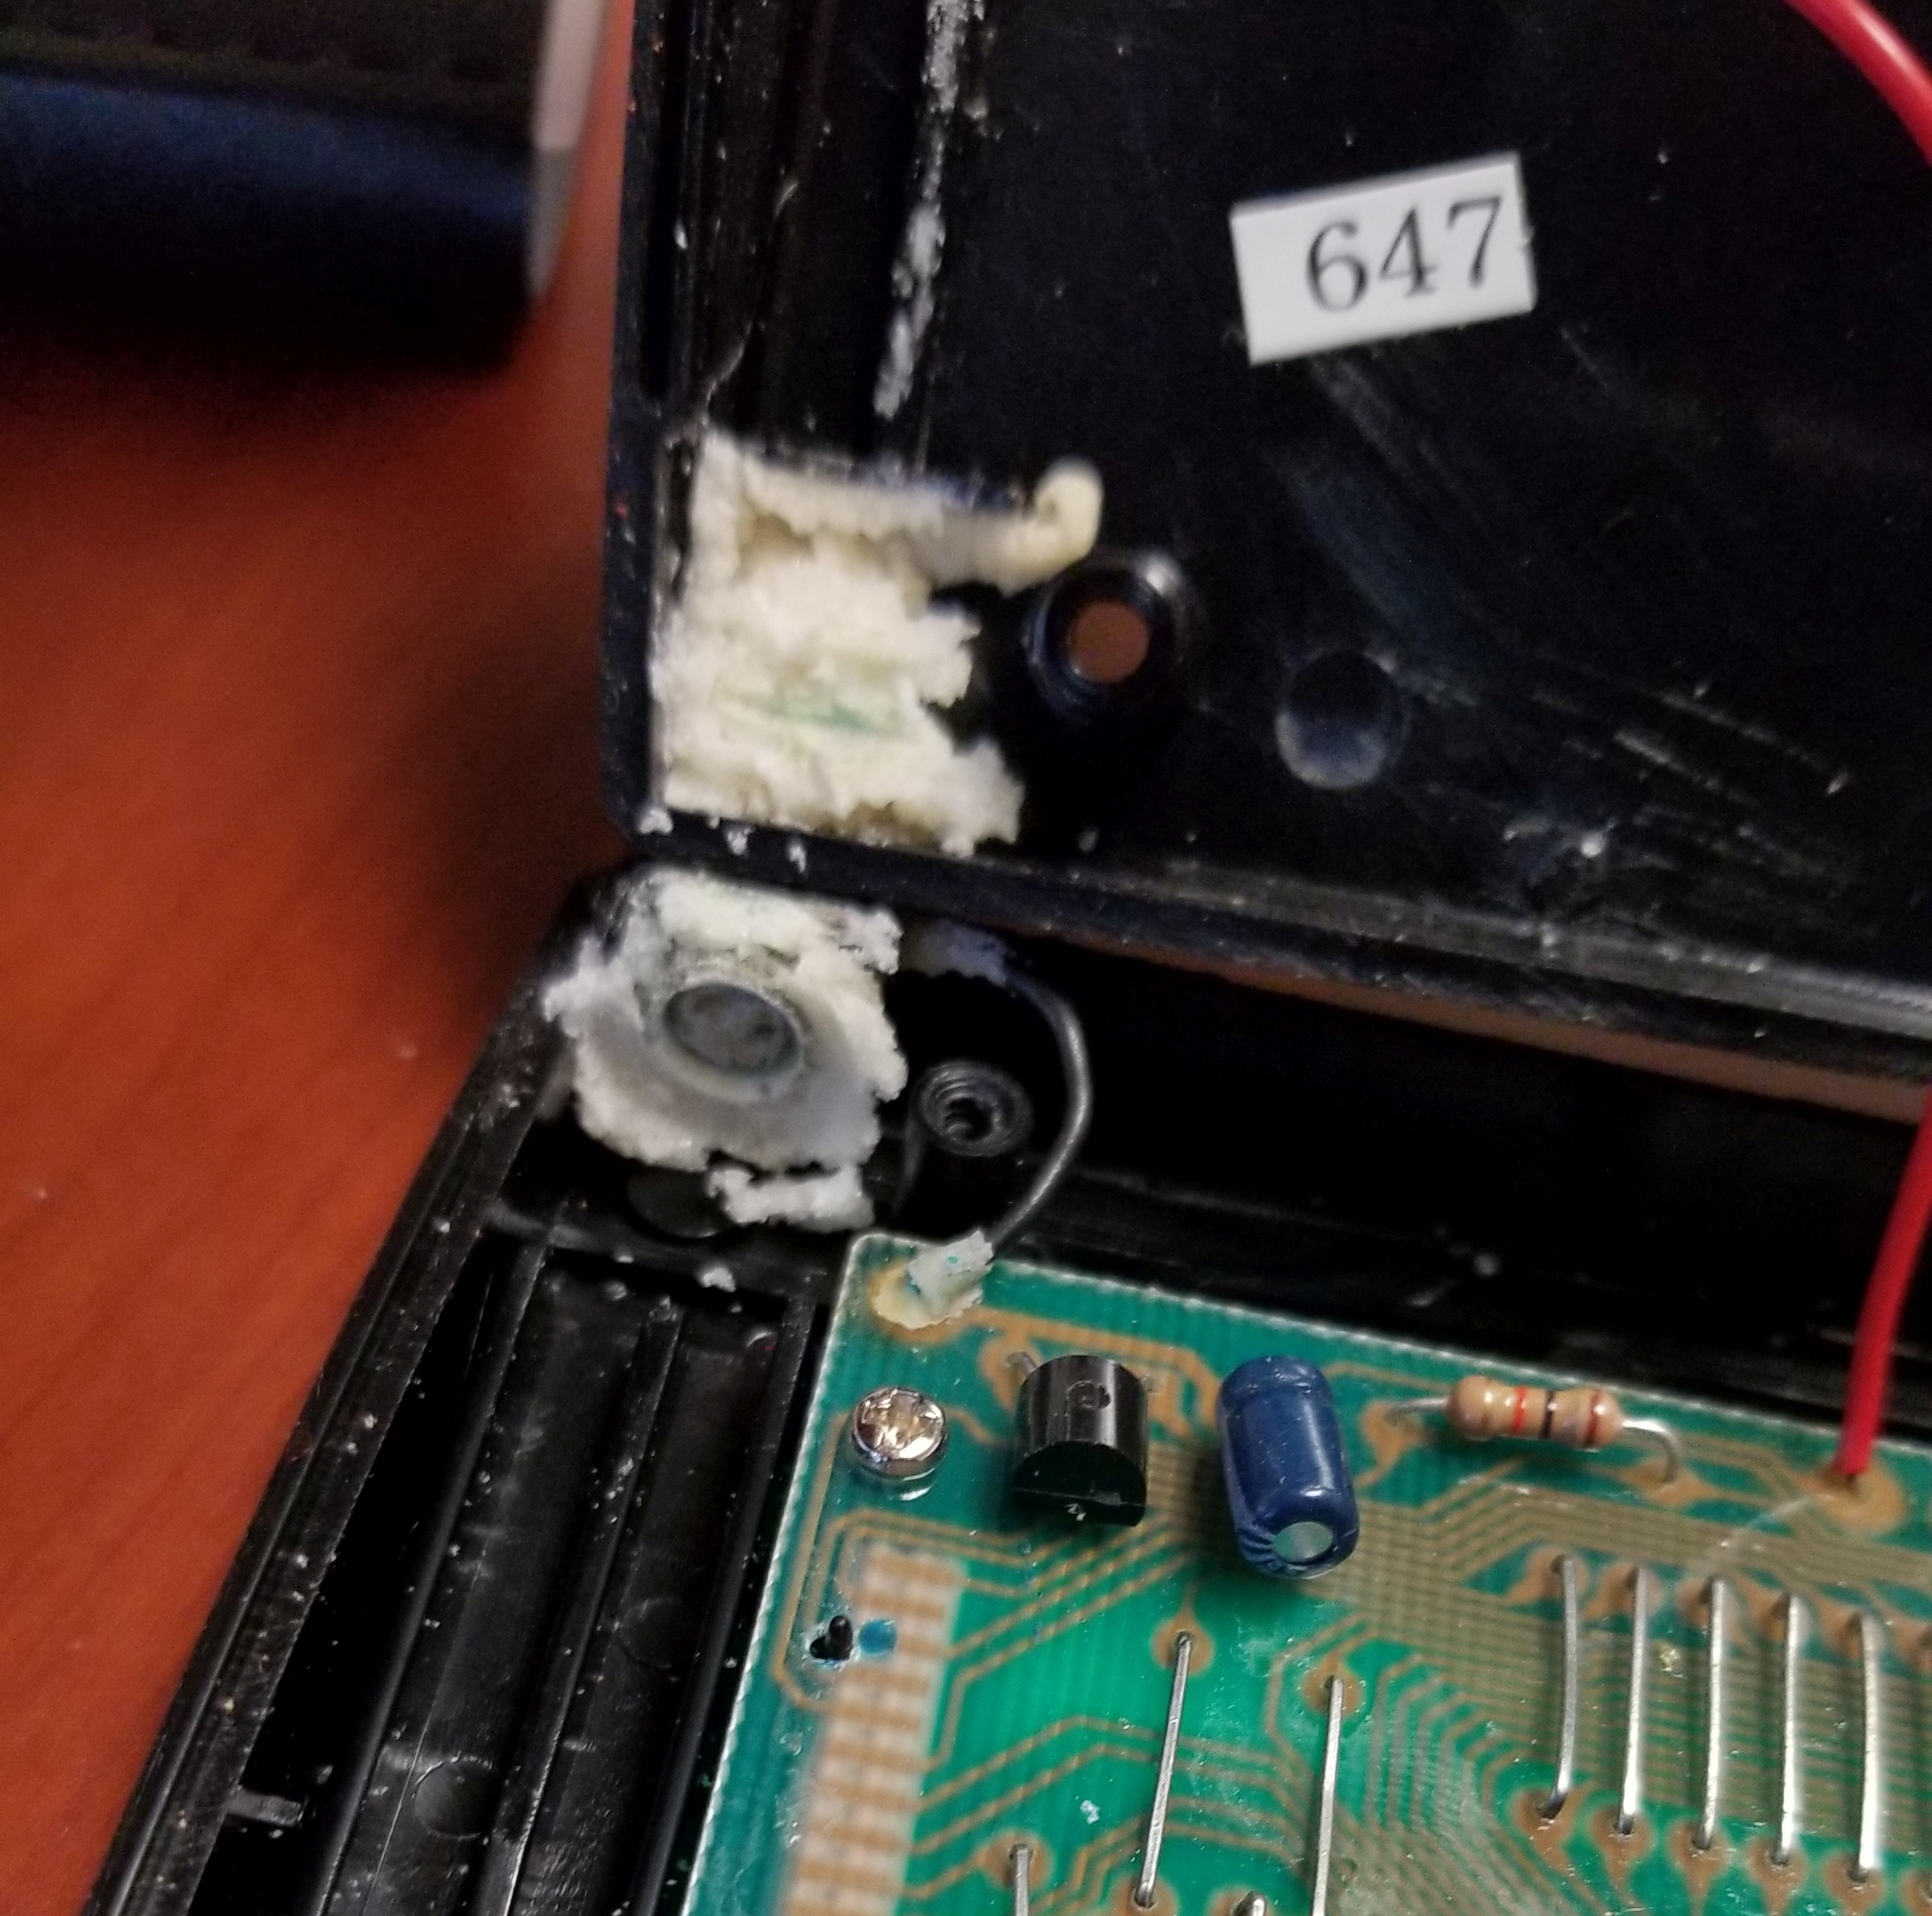 Battery corrosion in a handheld LCD billiards game